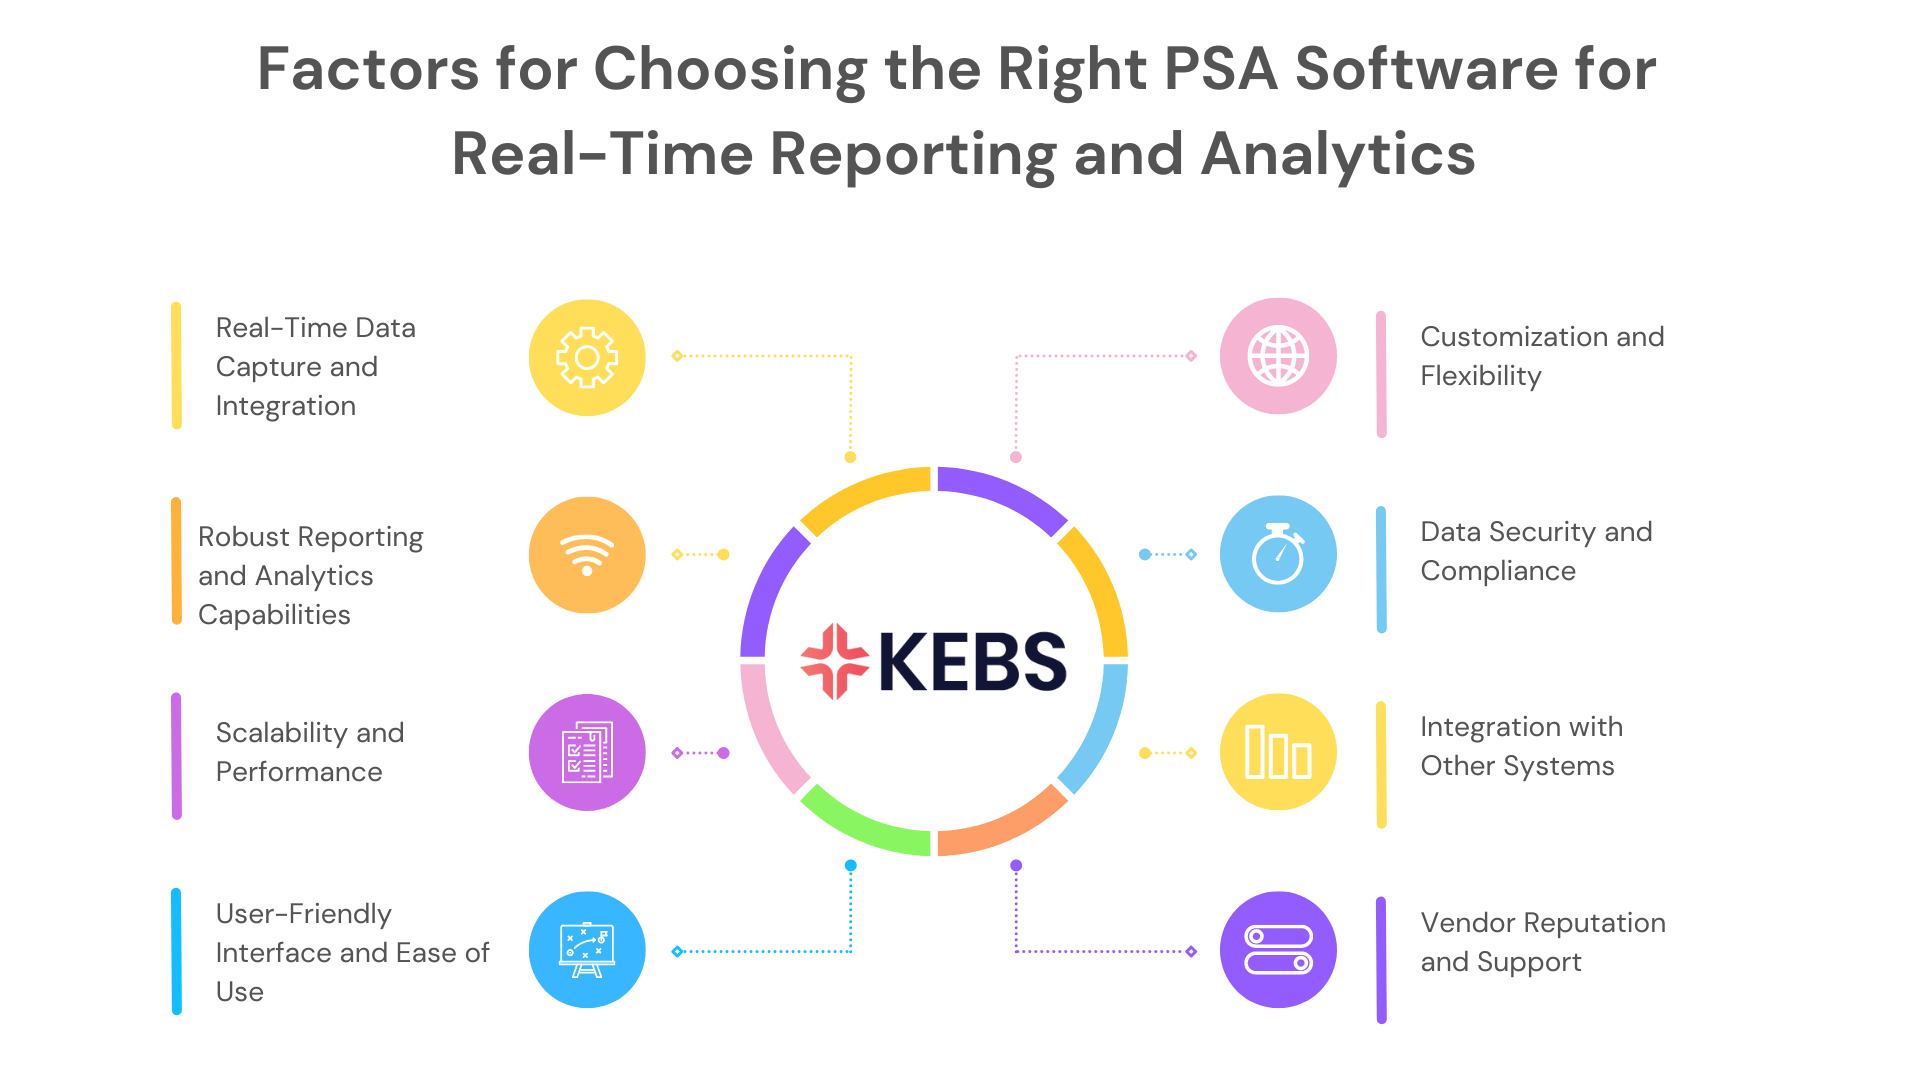 Factors for Choosing the Right PSA Software for Real-Time Reporting and Analytics